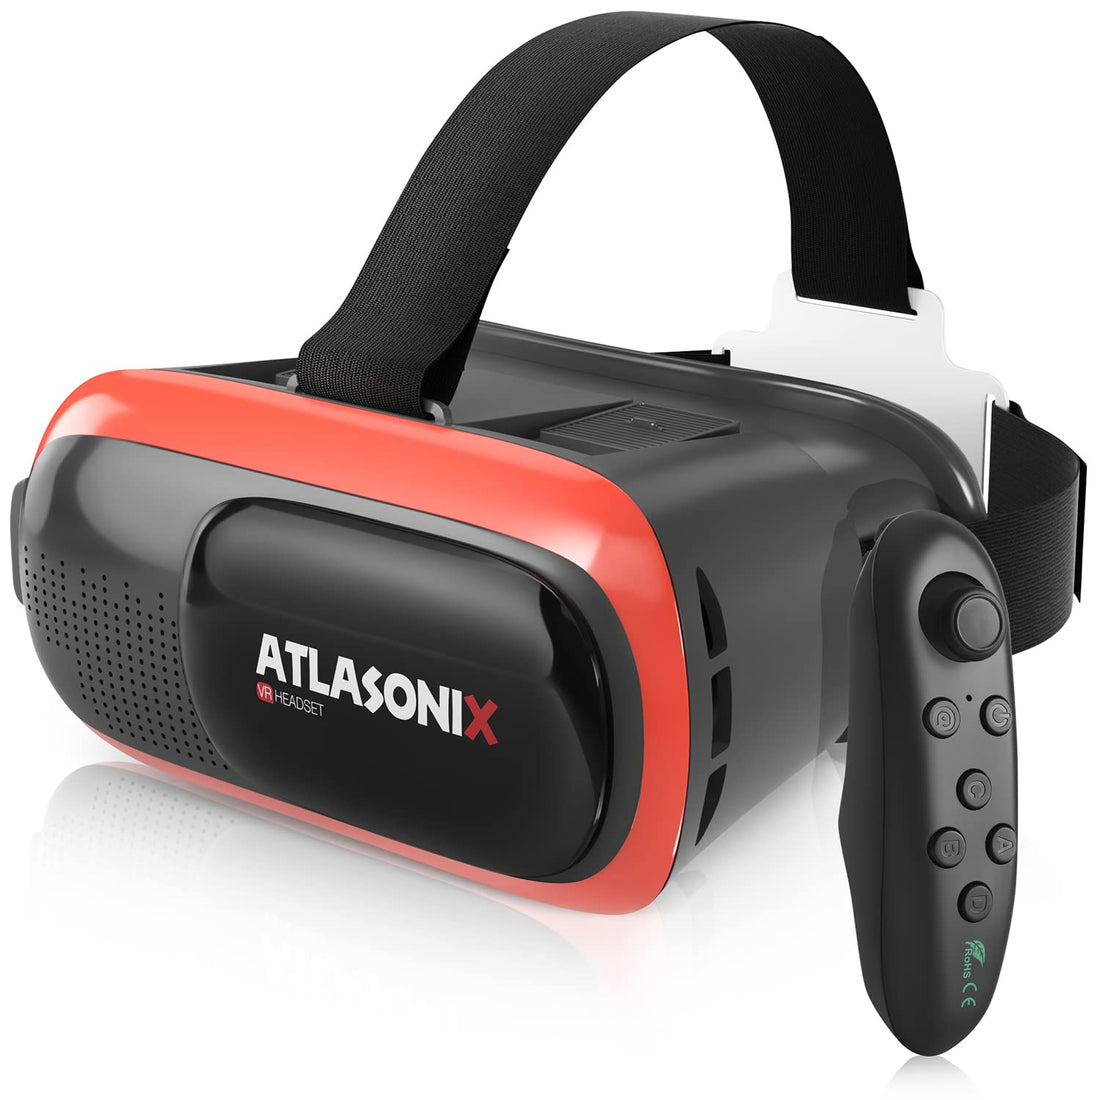 Atlasonix VR Headset Compatible with iPhone and Android Phones Bonus: Remote Control for Android Smartphones 3D Virtual Reality Goggles with Controller Adjustable VR Glasses for Kids and Adults